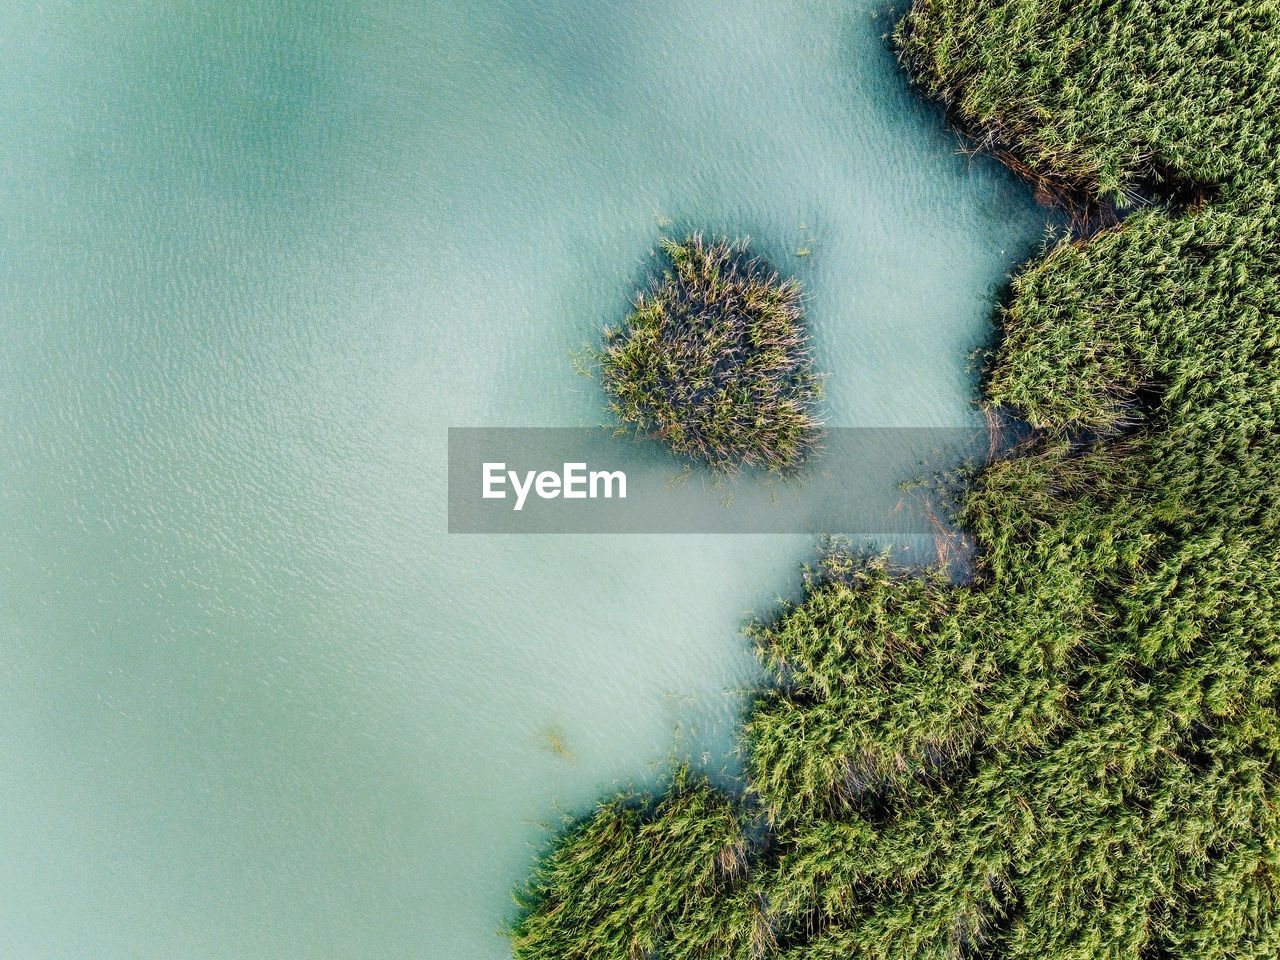 green, water, plant, nature, no people, high angle view, beauty in nature, leaf, day, tranquility, growth, environment, lake, outdoors, aerial view, land, scenics - nature, flower, tree, reflection, grass, reef